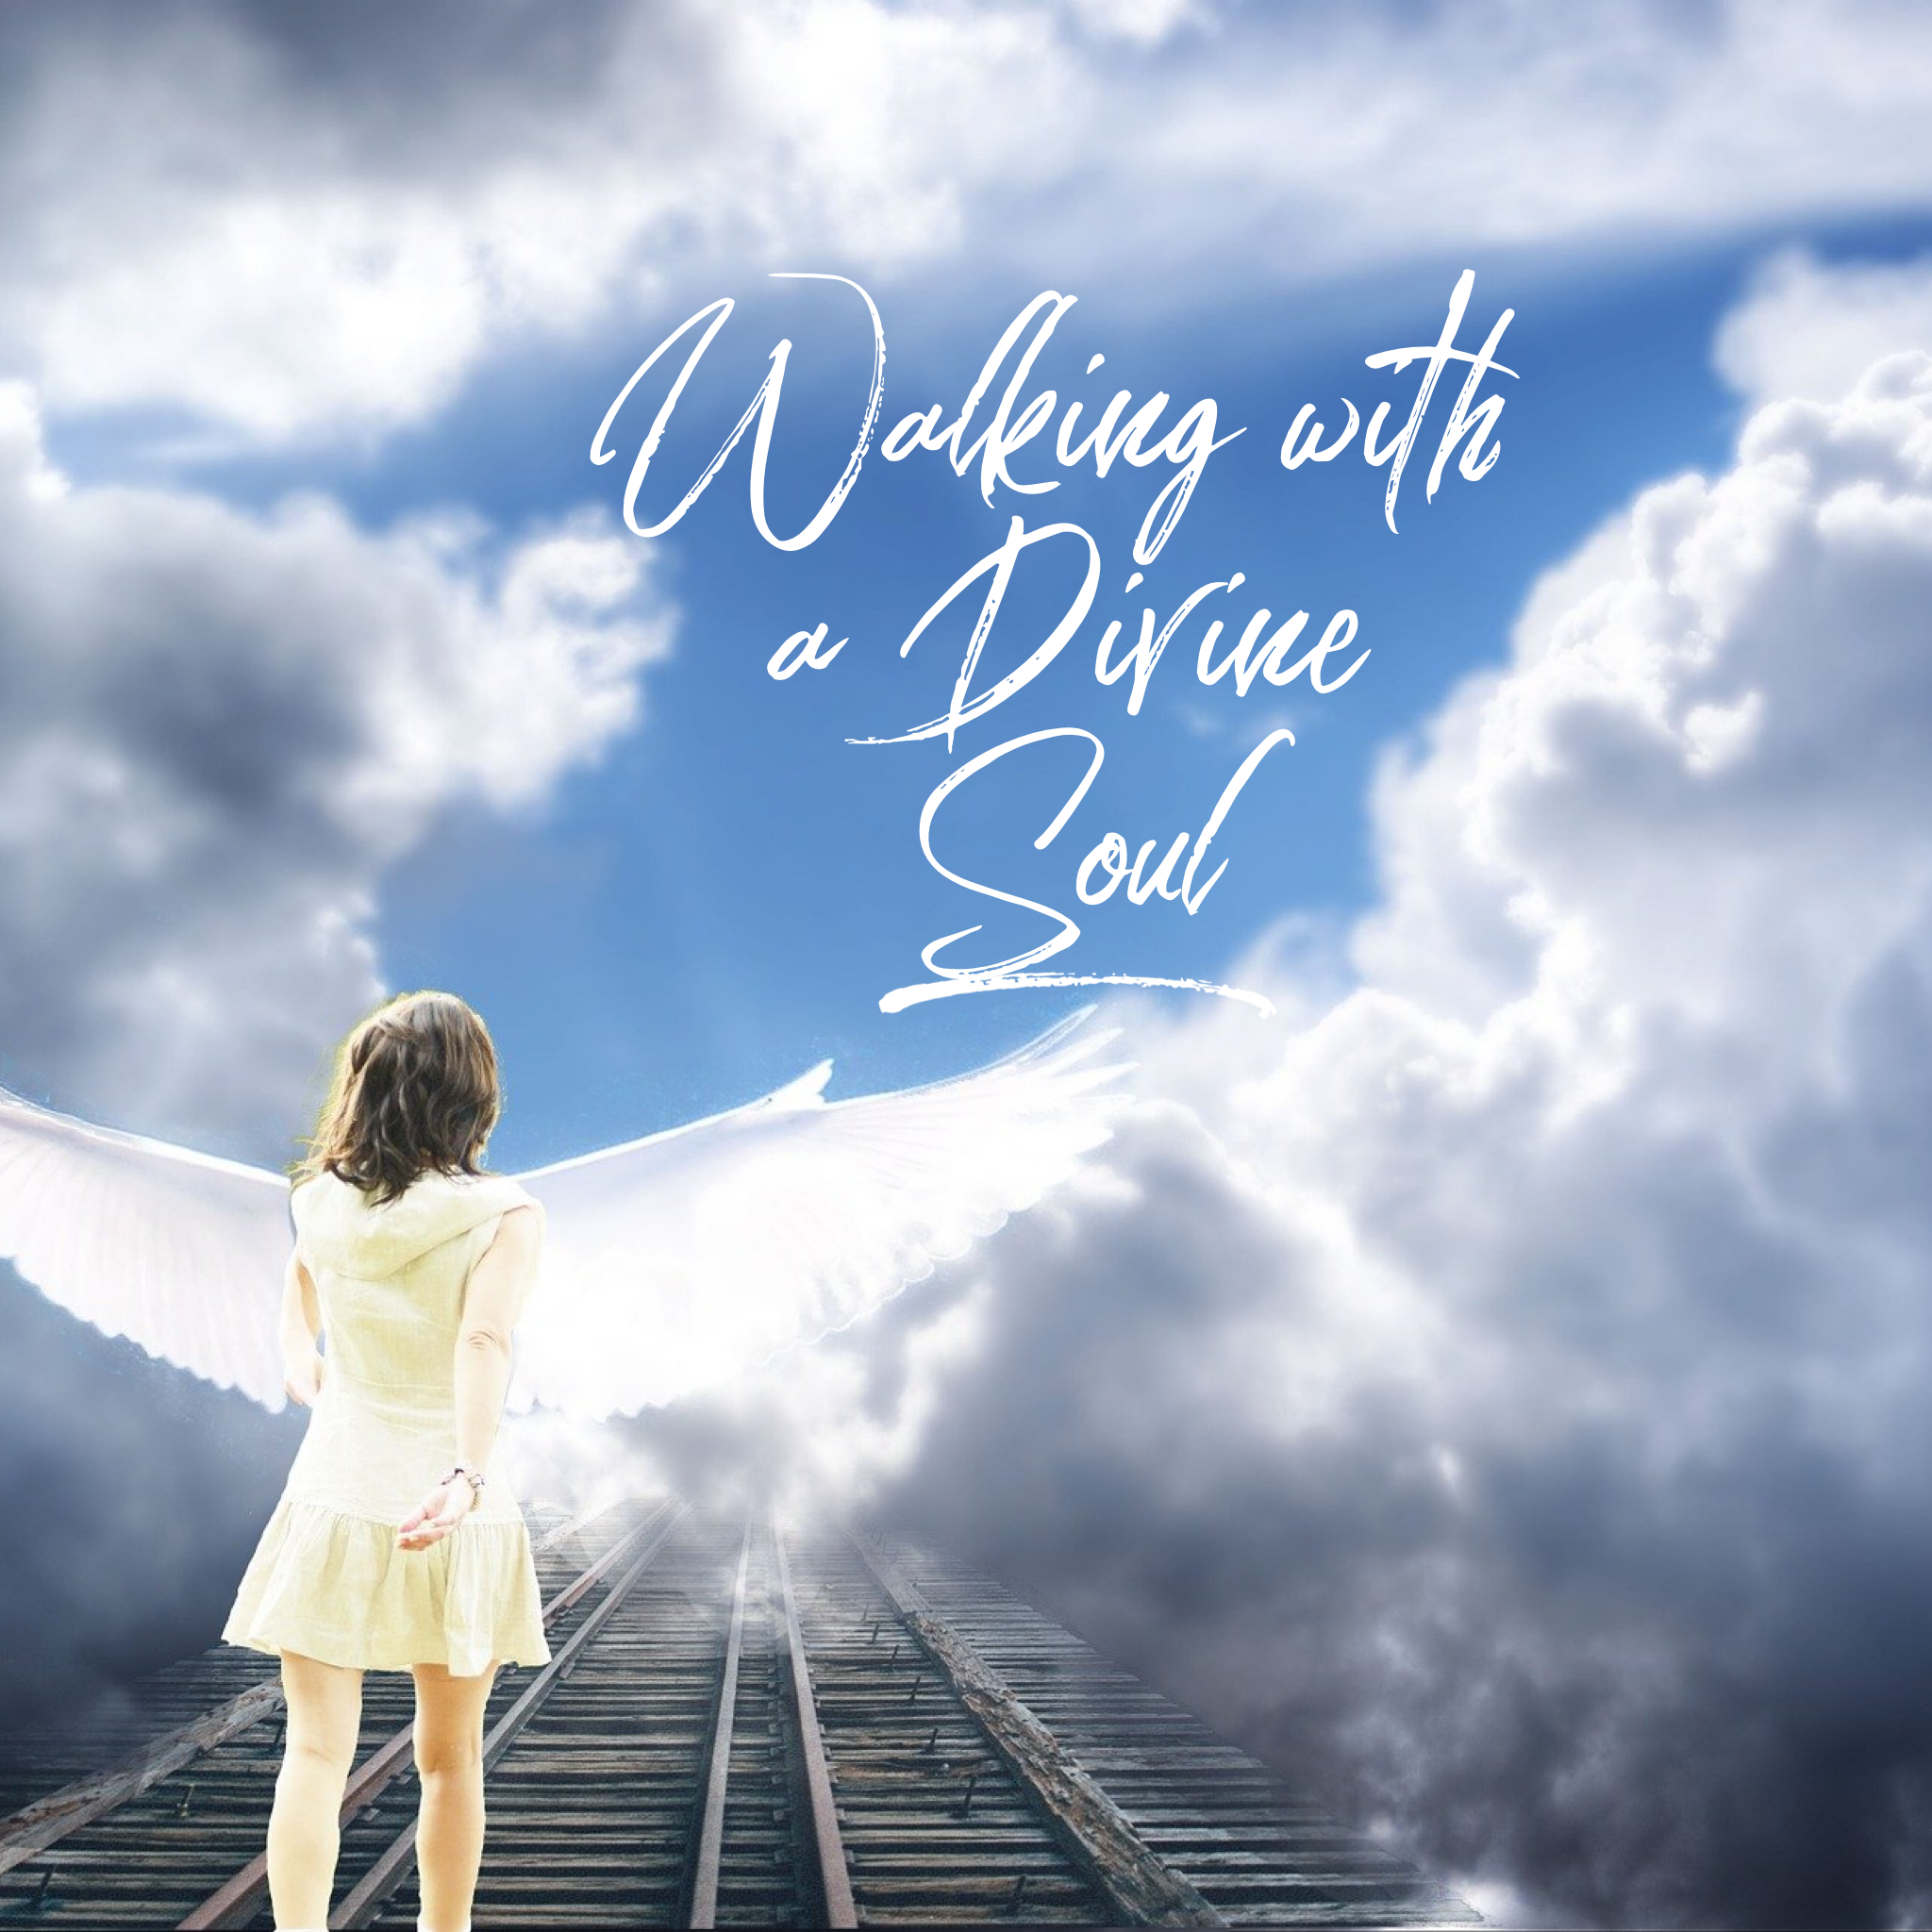 Walking with a Divine Soul - 5/30/21